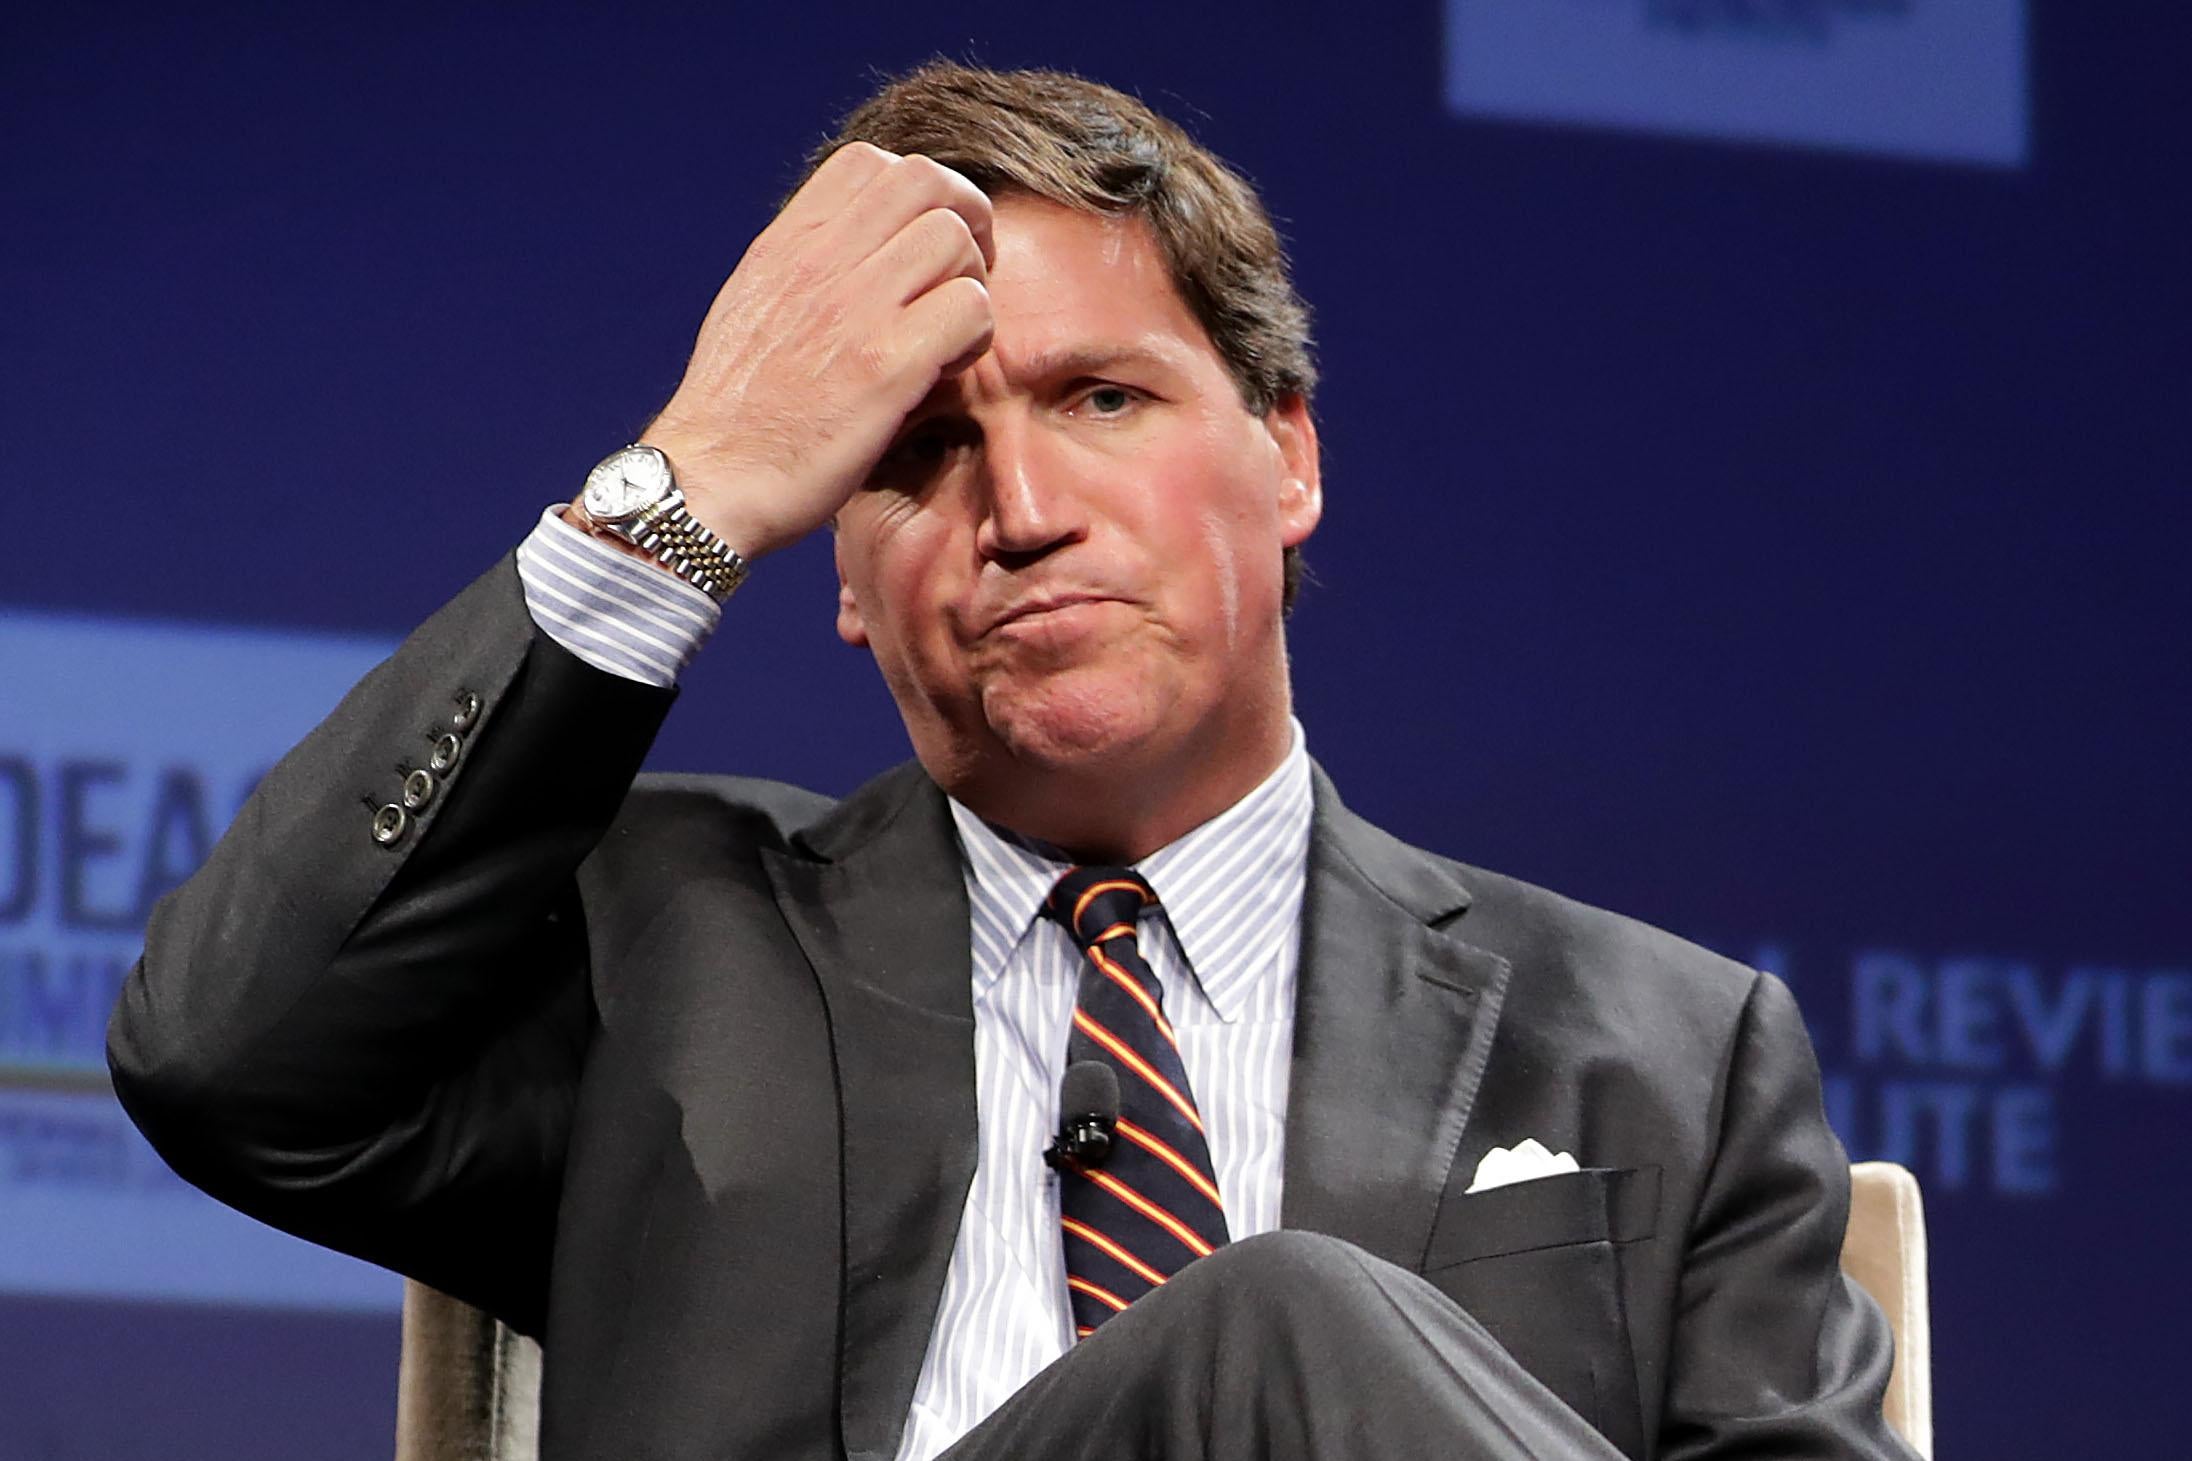 WASHINGTON, DC - MARCH 29: Fox News host Tucker Carlson discusses 'Populism and the Right' during the National Review Institute's Ideas Summit at the Mandarin Oriental Hotel March 29, 2019 in Washington, DC. Carlson talked about a large variety of topics including dropping testosterone levels, increasing rates of suicide, unemployment, drug addiction and social hierarchy at the summit, which had the theme 'The Case for the American Experiment.'  (Photo by Chip Somodevilla/Getty Images)